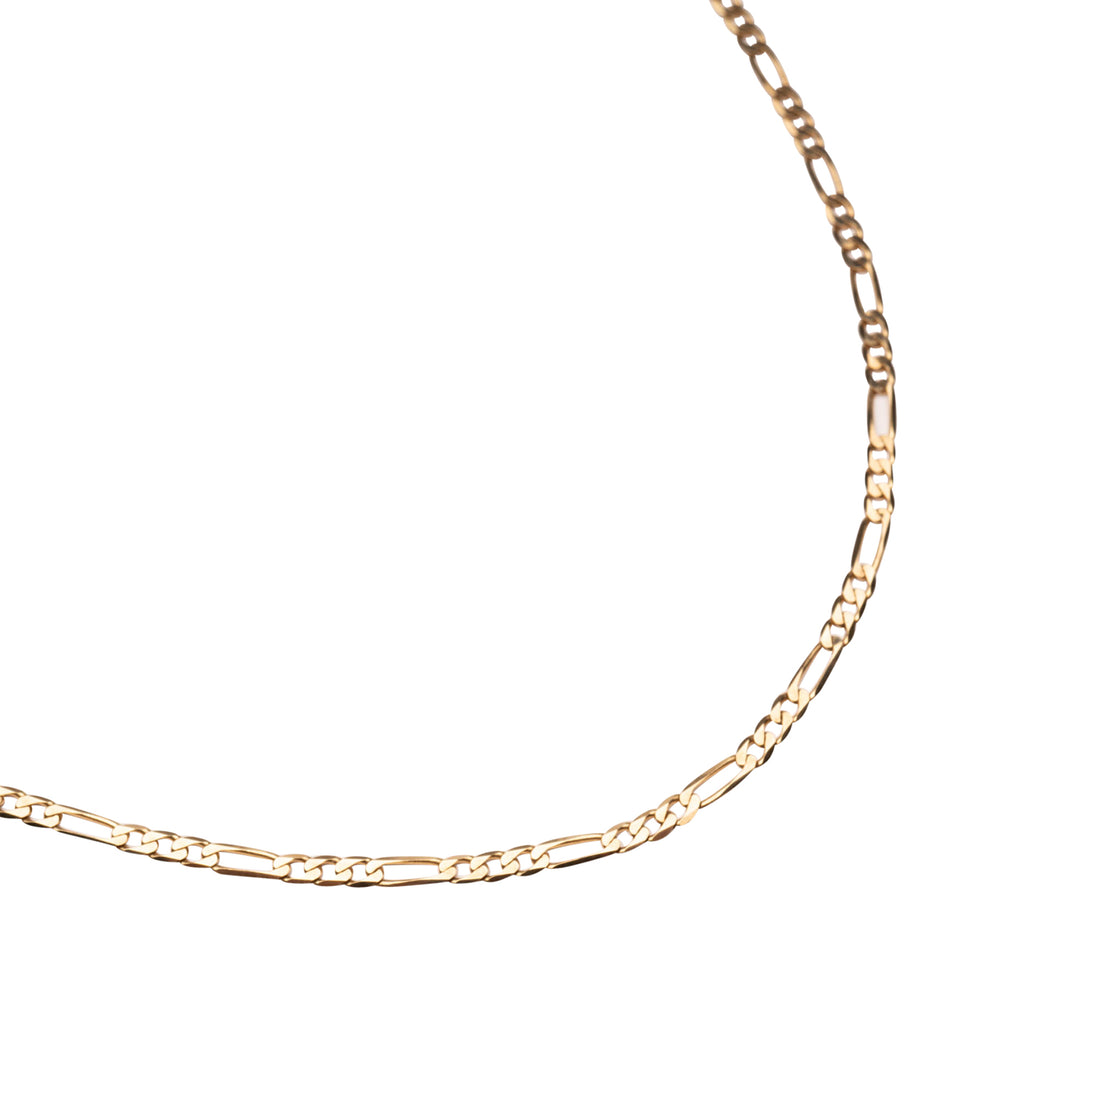 14k Gold Figaro Necklace